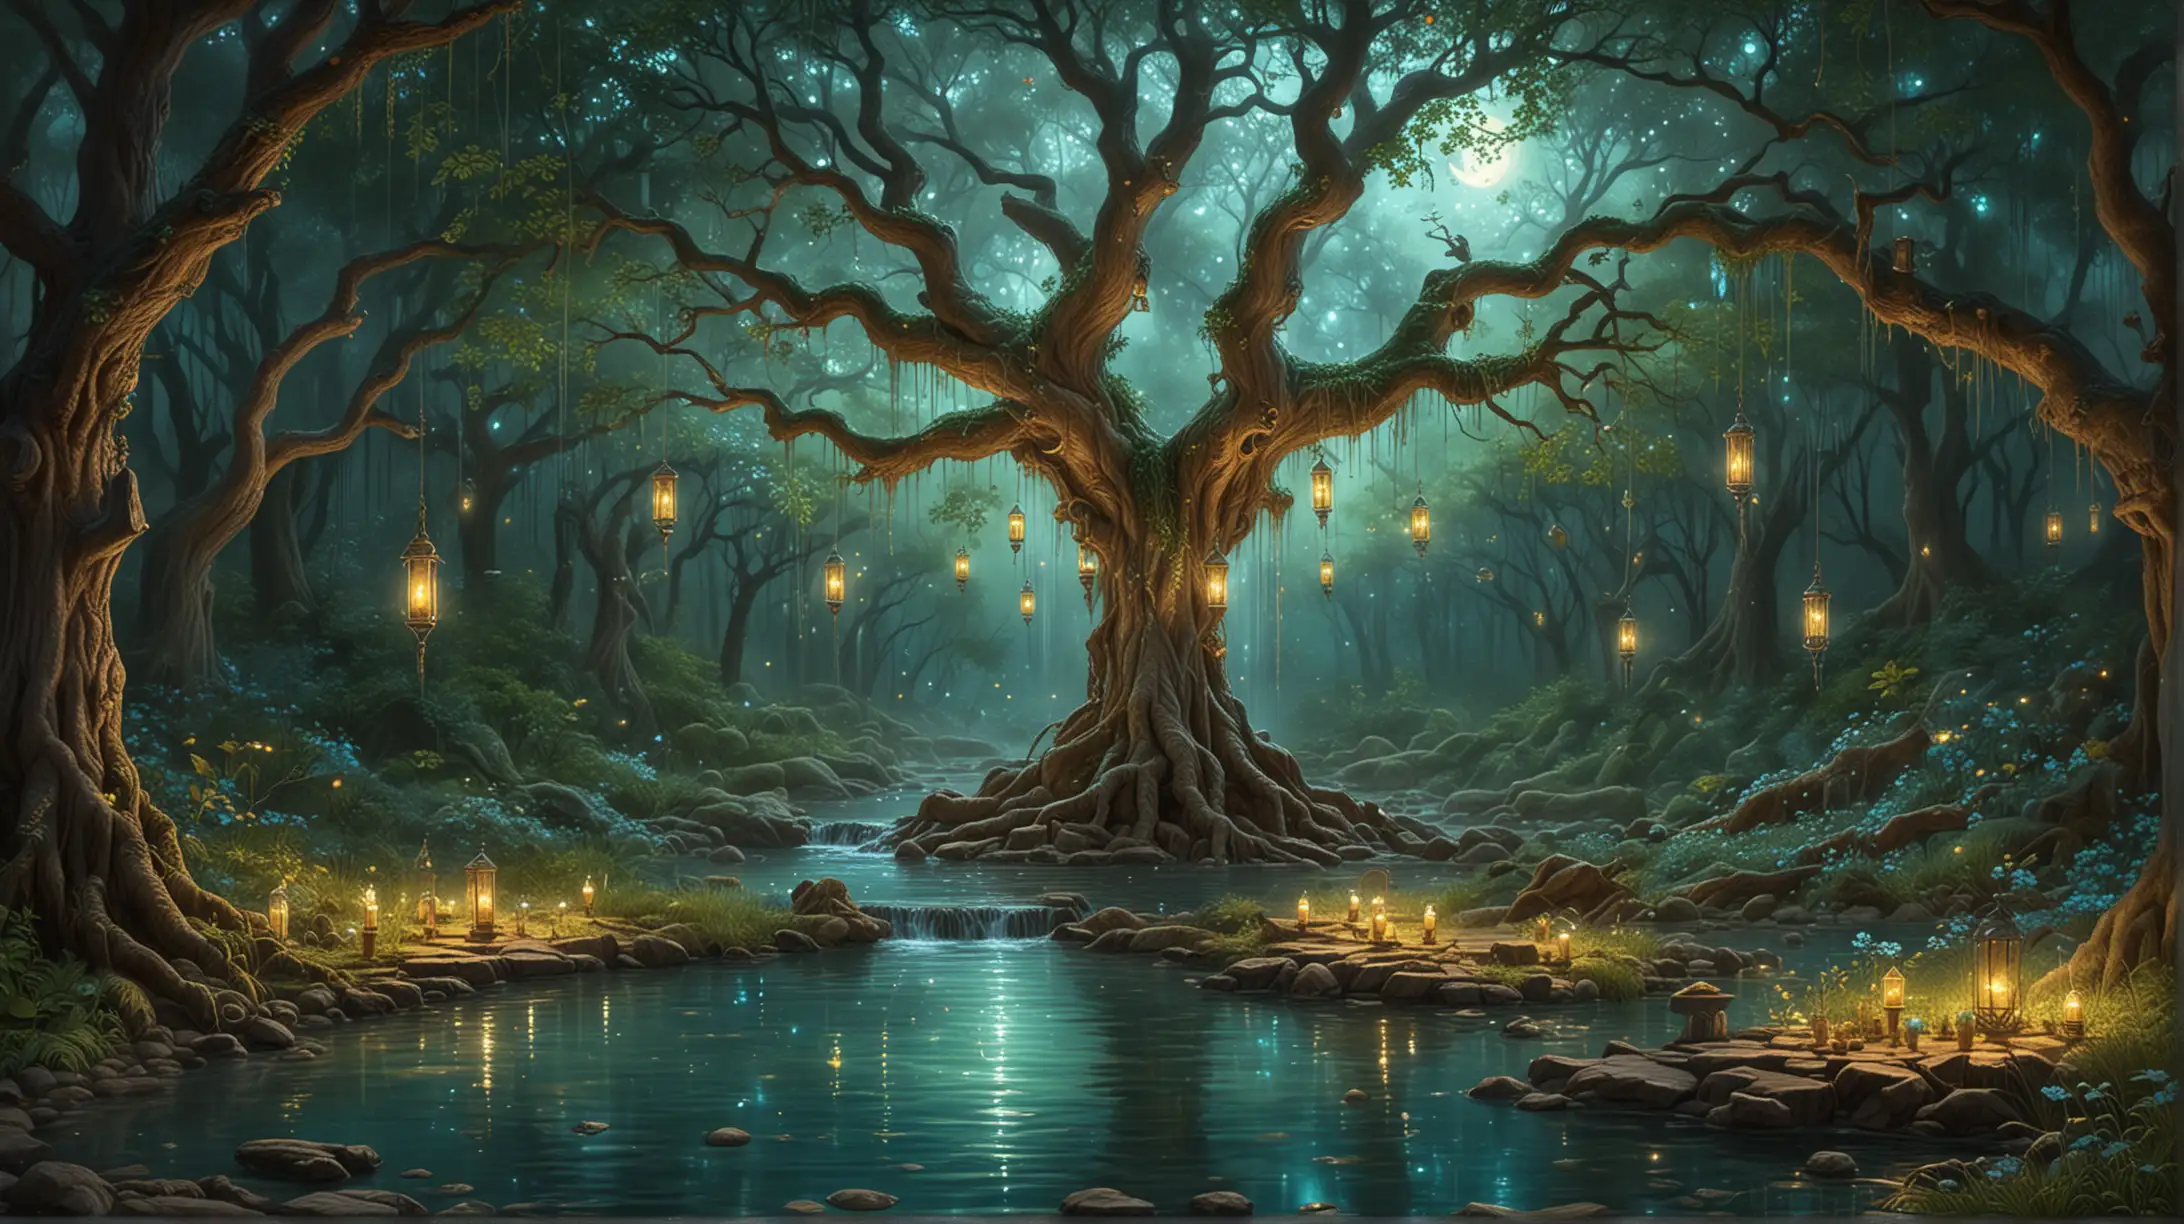 the fountain of youth, waterfall pouring down into a shimmering pool of illuminated water, next to it stands the tree of life, hidden in a remote and mystical lush green magical forest with old oak trees and willow trees, lanterns hanging in the trees, ash dark turquoise background, moon, orions belt, stars, starfall, butterflies, dragonflies, pastel colors, vintage, kerem beyit, by Daniel Merriam, esao andrews, ornate, by Kerembeyit, inspired by Daniel Merriam, by Jan Kip, fire flies, daniel merriam, highly detailed digital artwork, antique, vintage, dusty, and rugged illustration